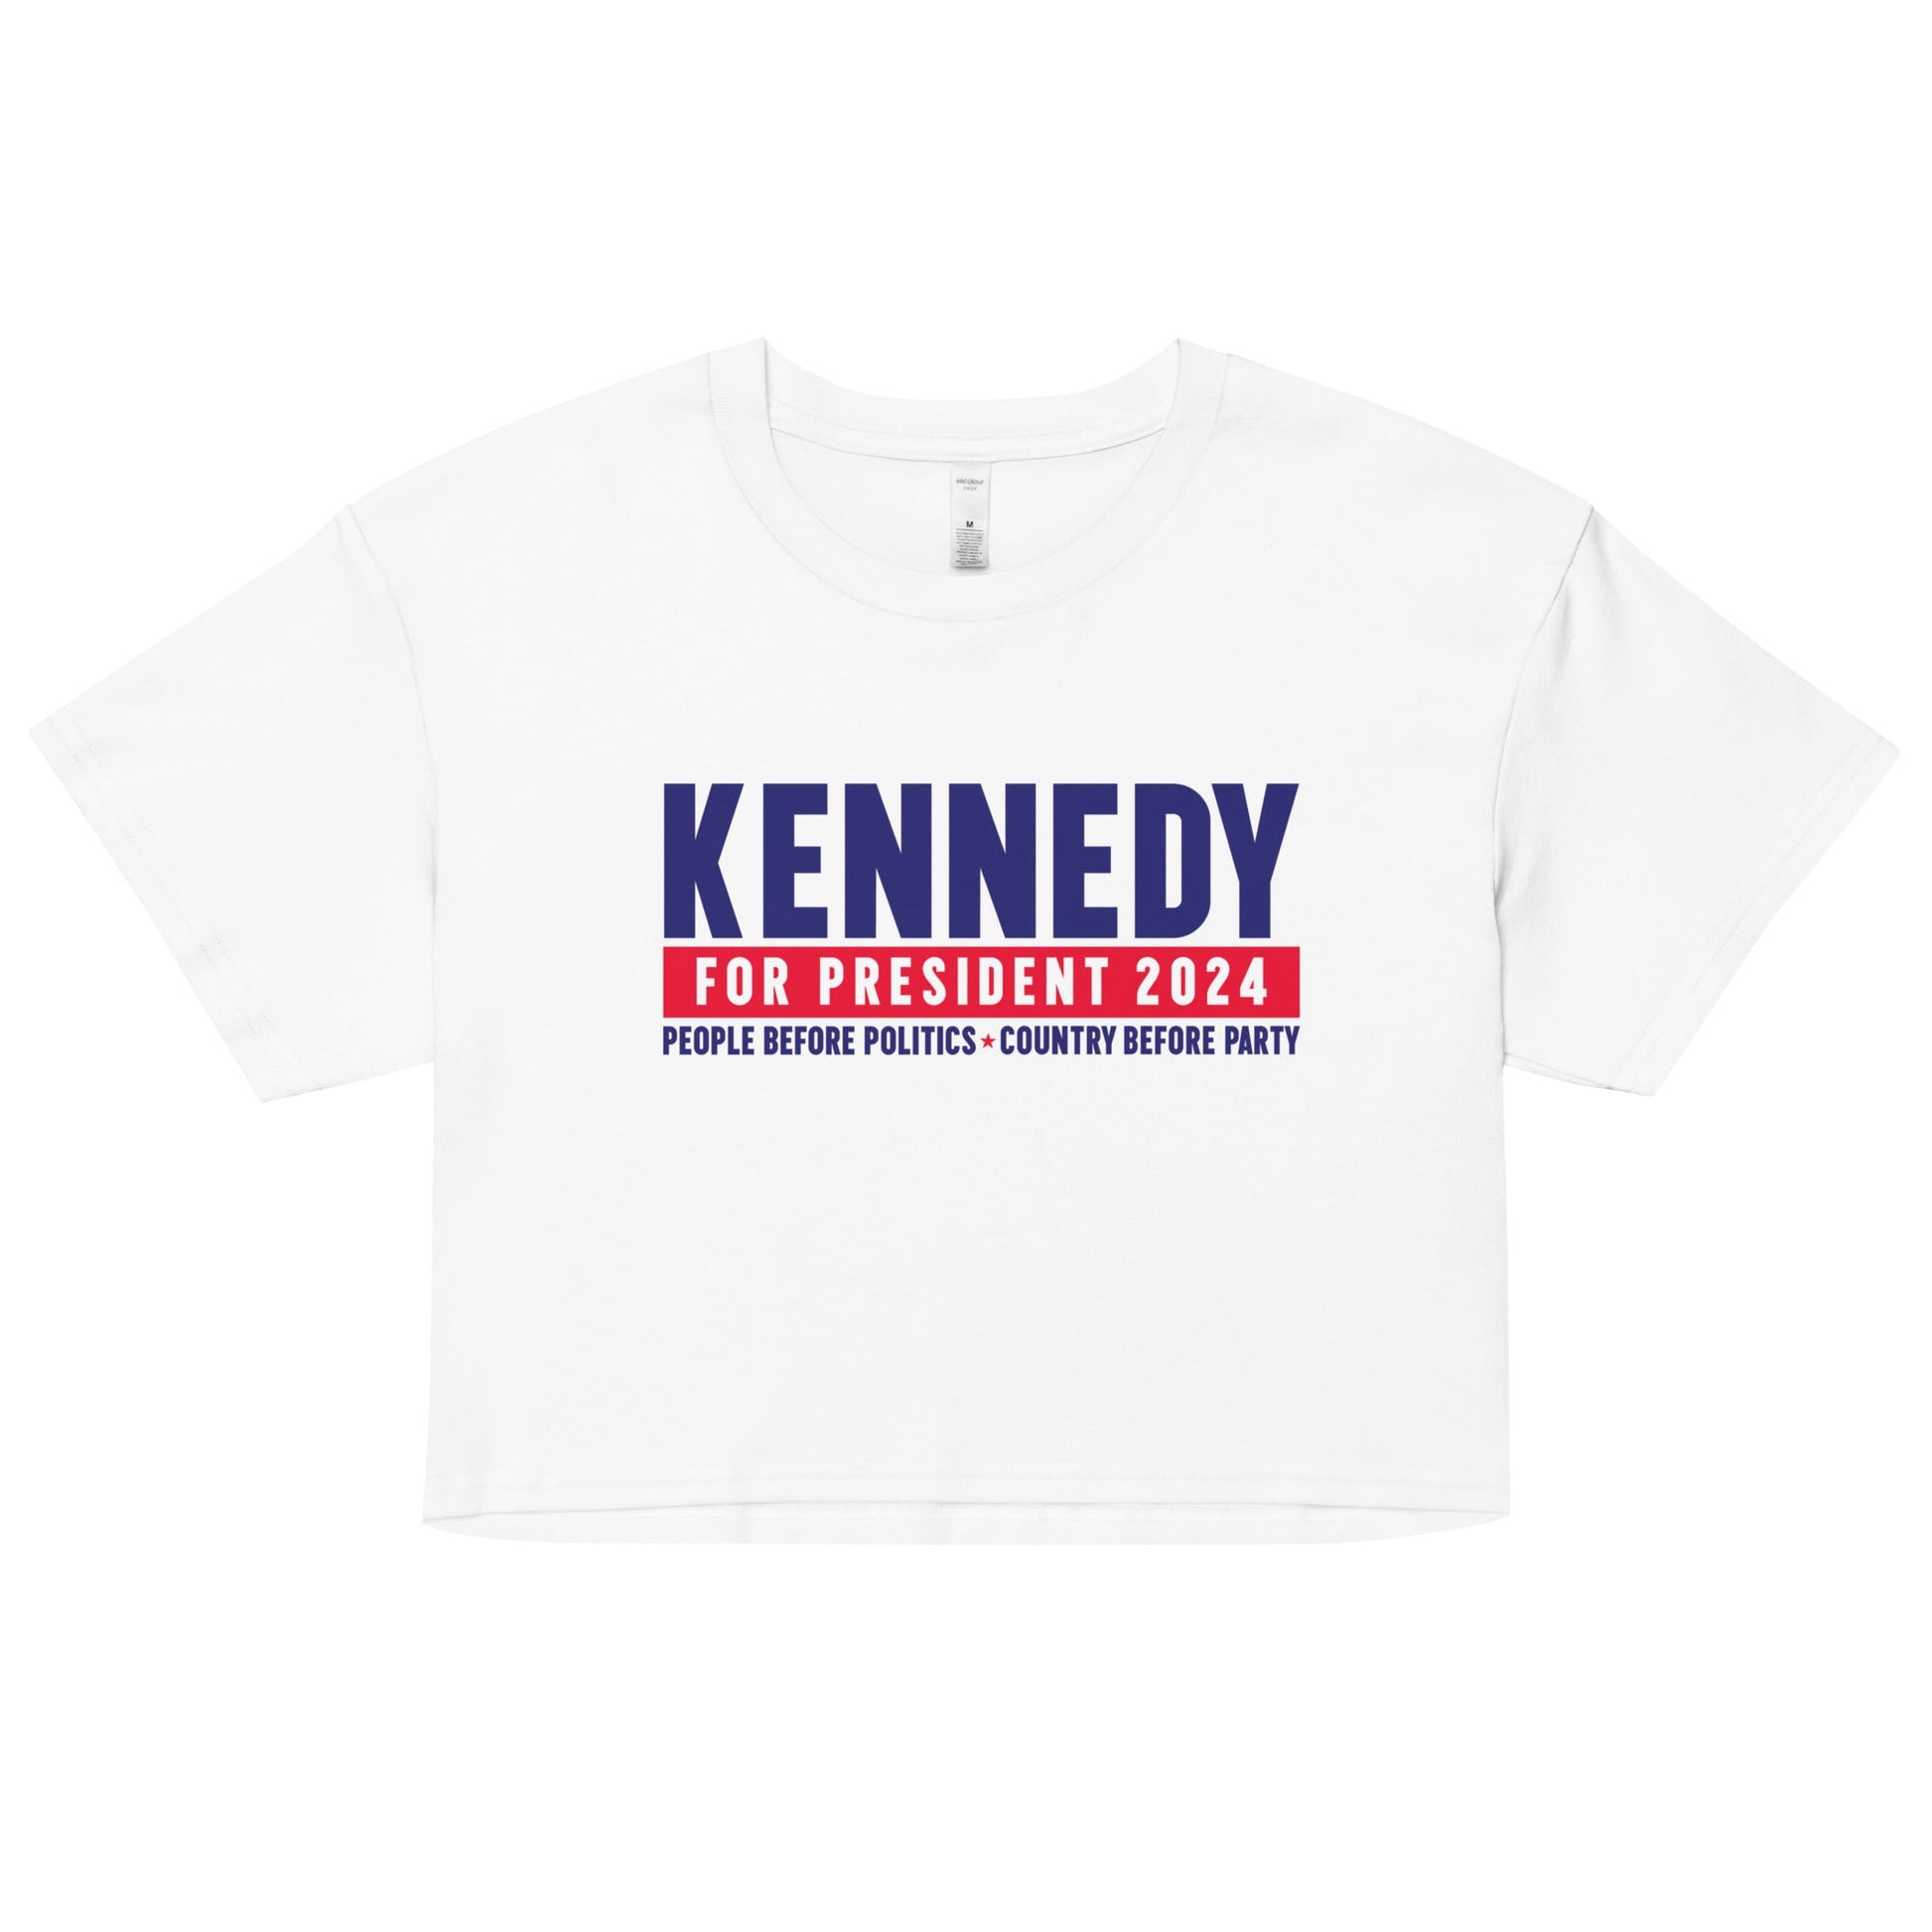 Kennedy for the People Women’s Crop Top - TEAM KENNEDY. All rights reserved